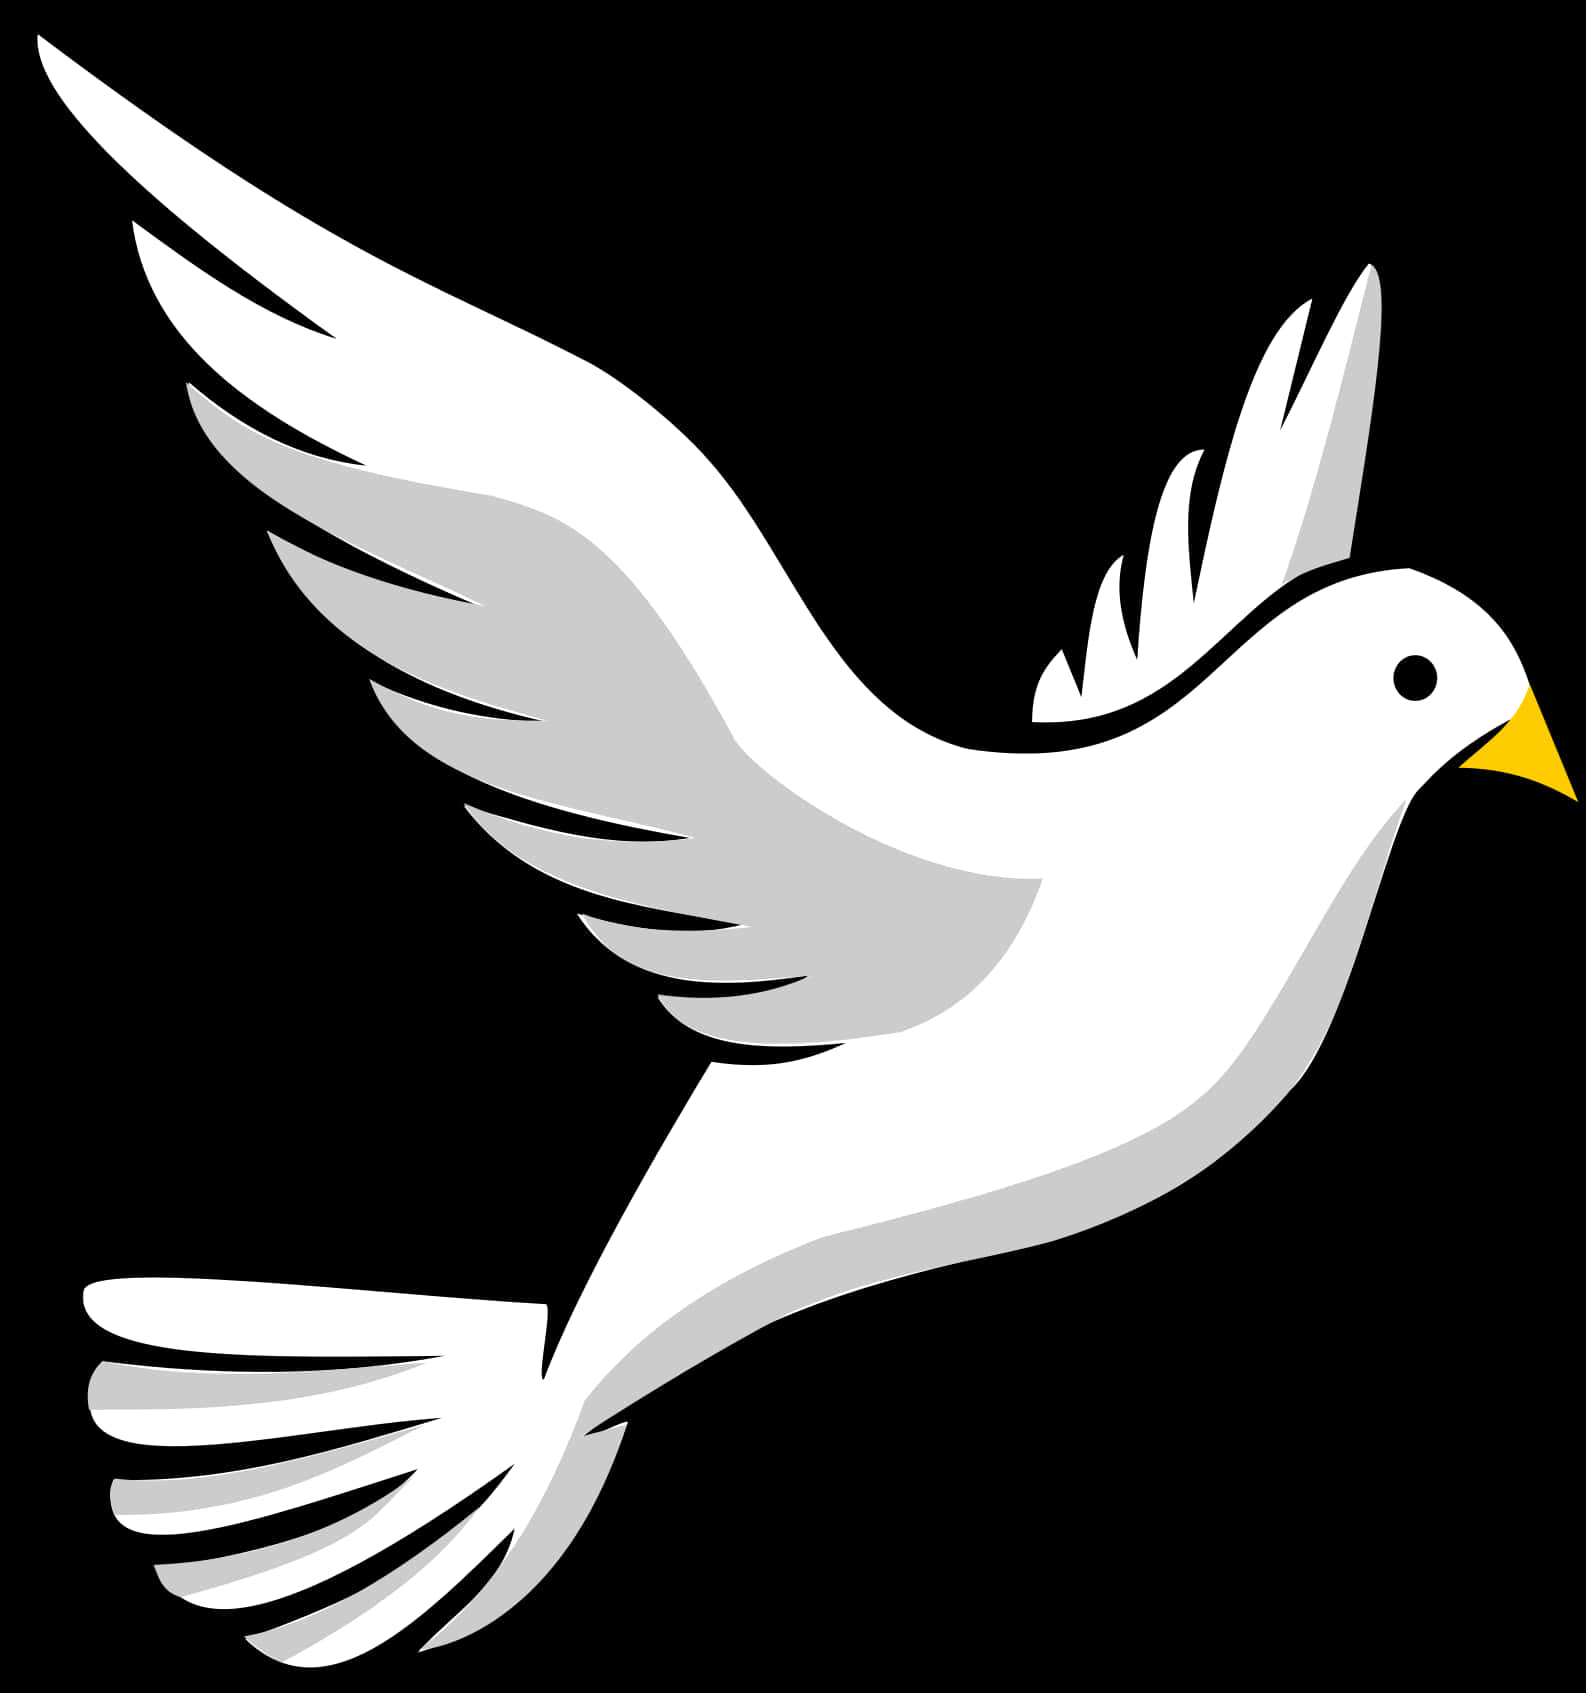 Stylized White Dove Graphic PNG